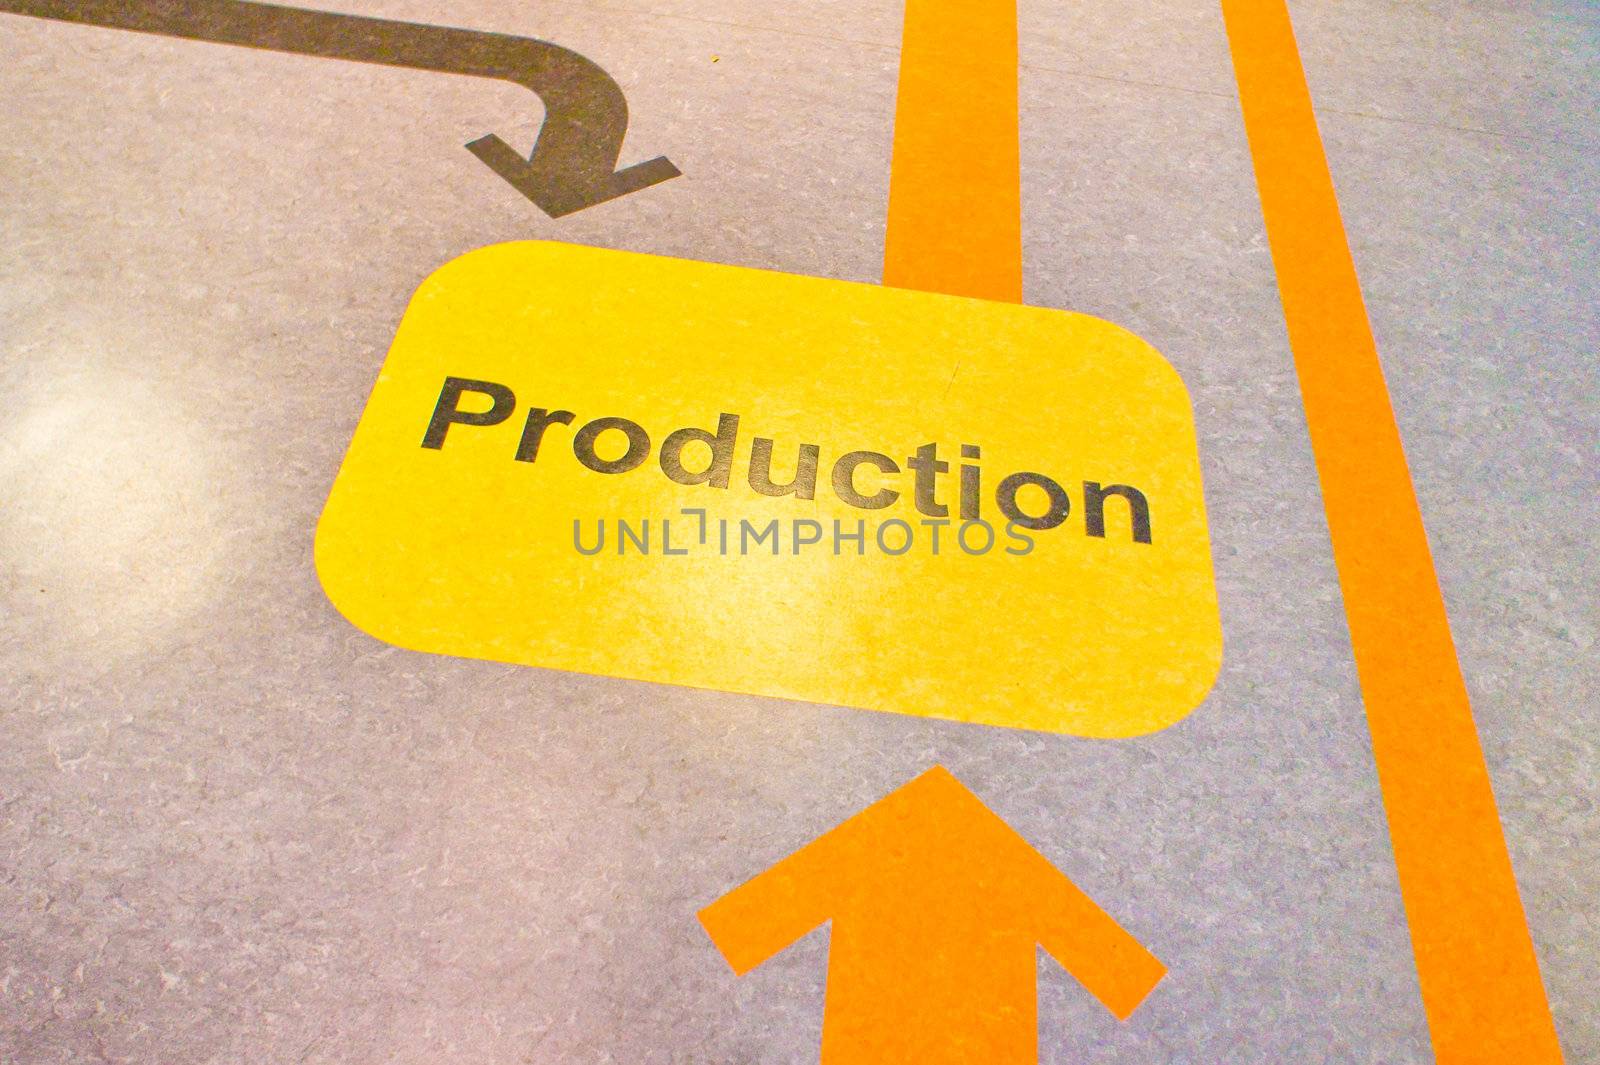 Production sign as part of an industrial flow chart